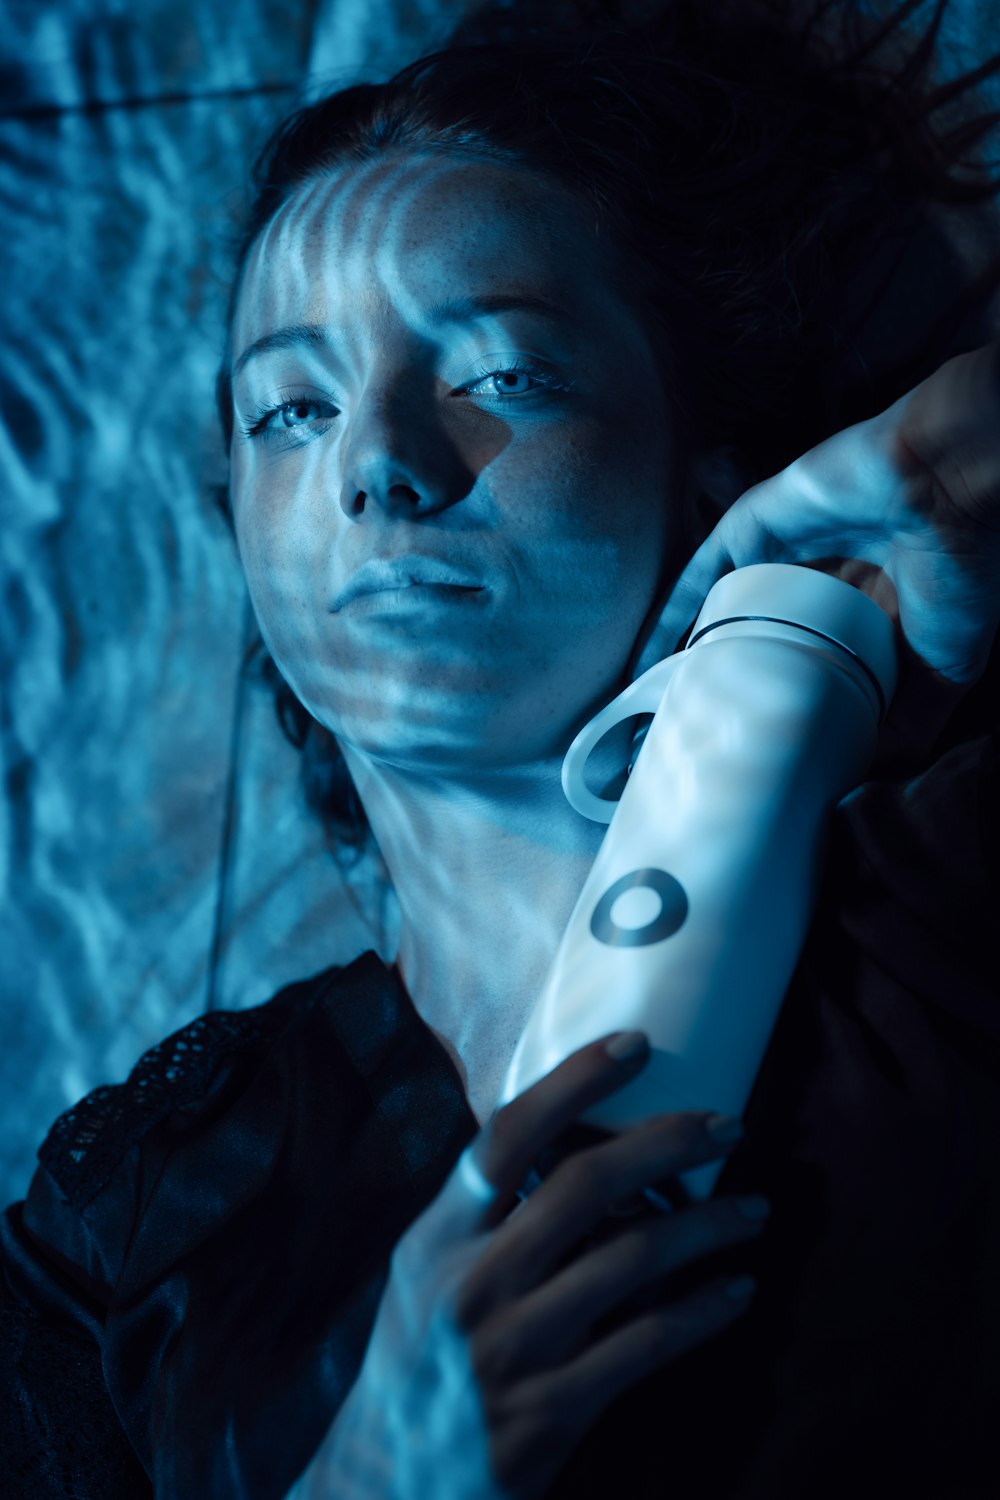 a woman holding a hair dryer in her hand